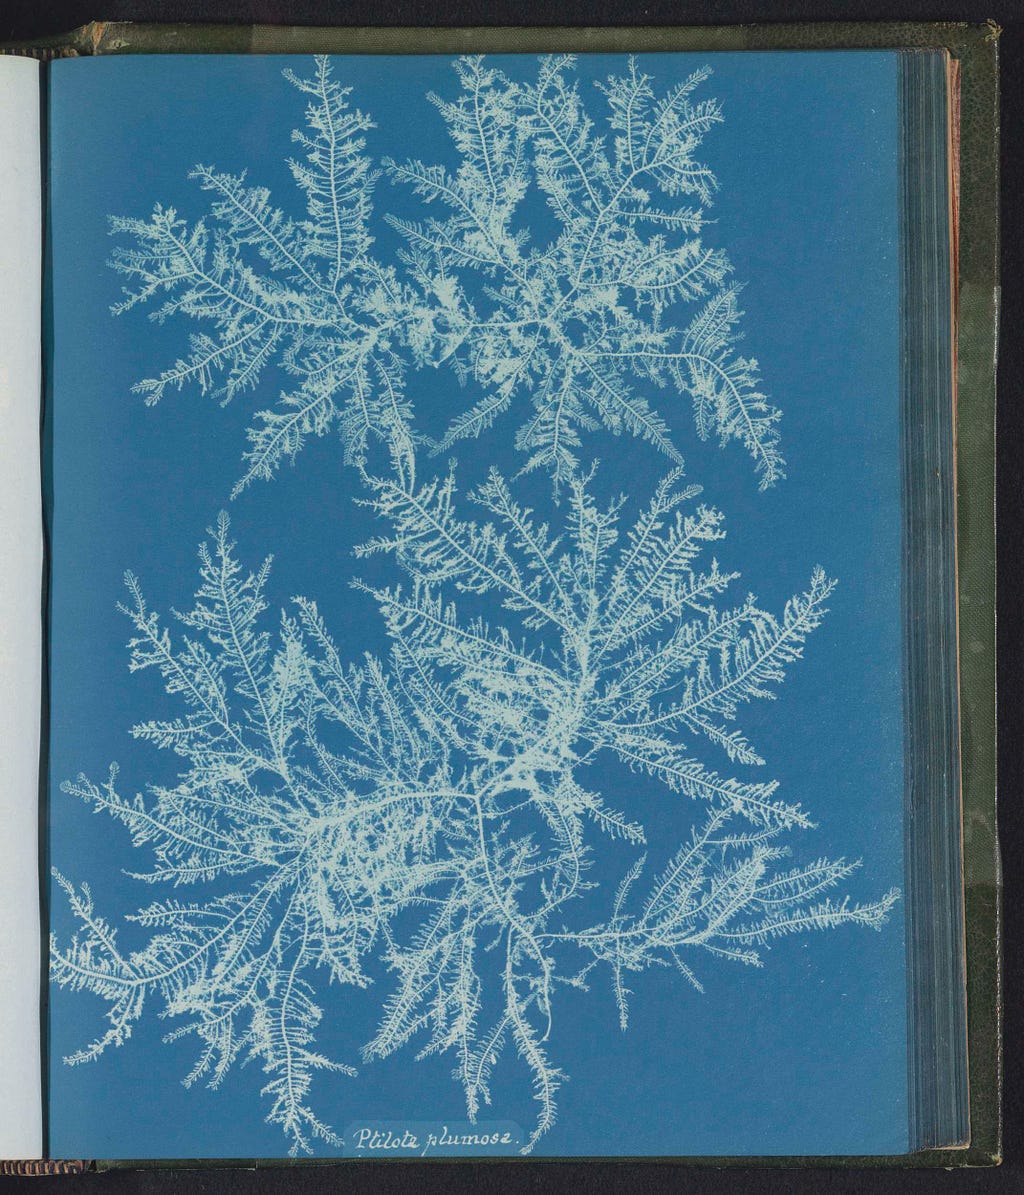 A cyanotype of a seaweed with white seaweed on a blue background.